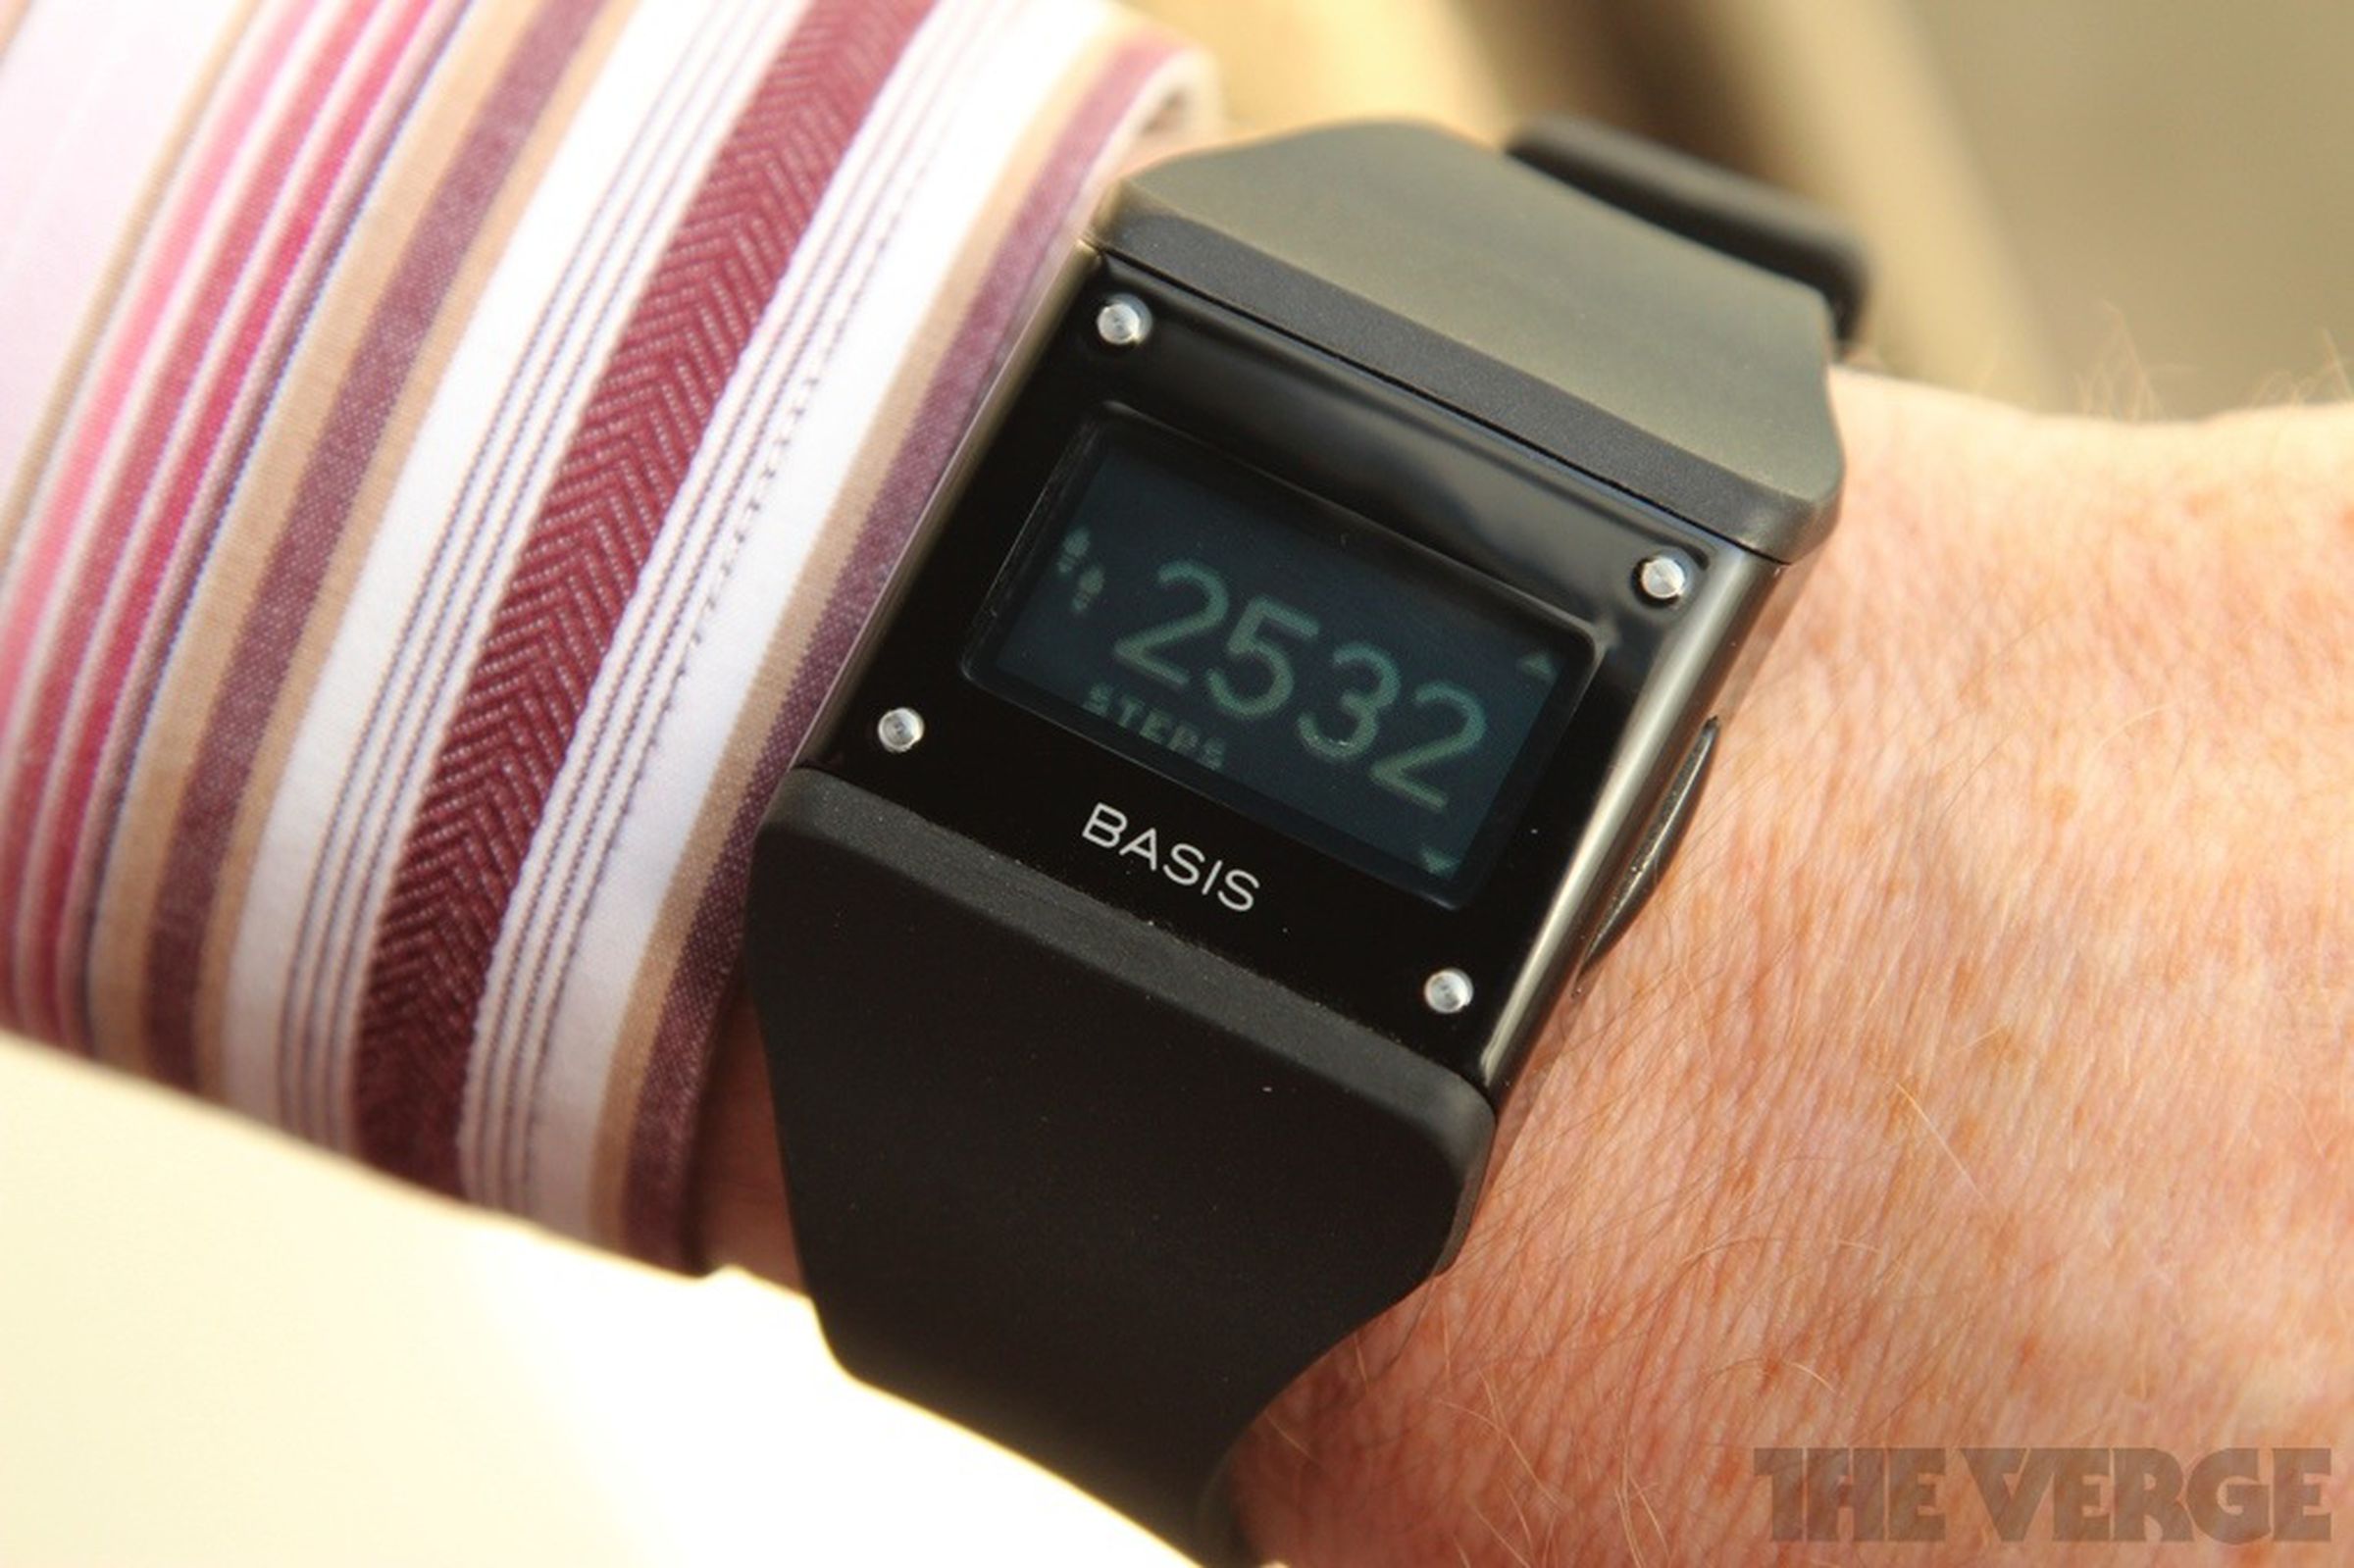 Basis fitness band pictures